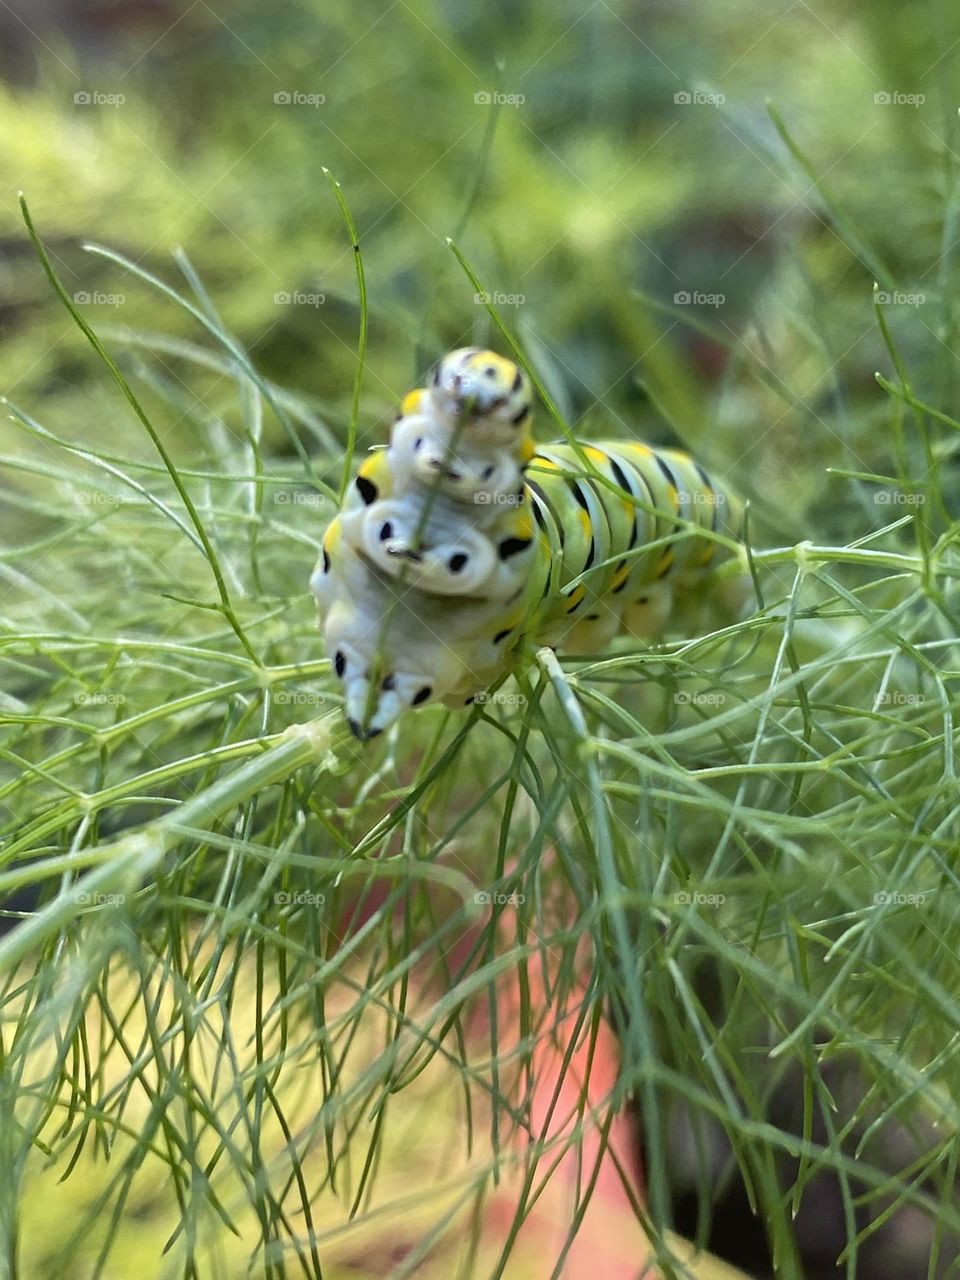 Yellow tail caterpillar munching on some fennel